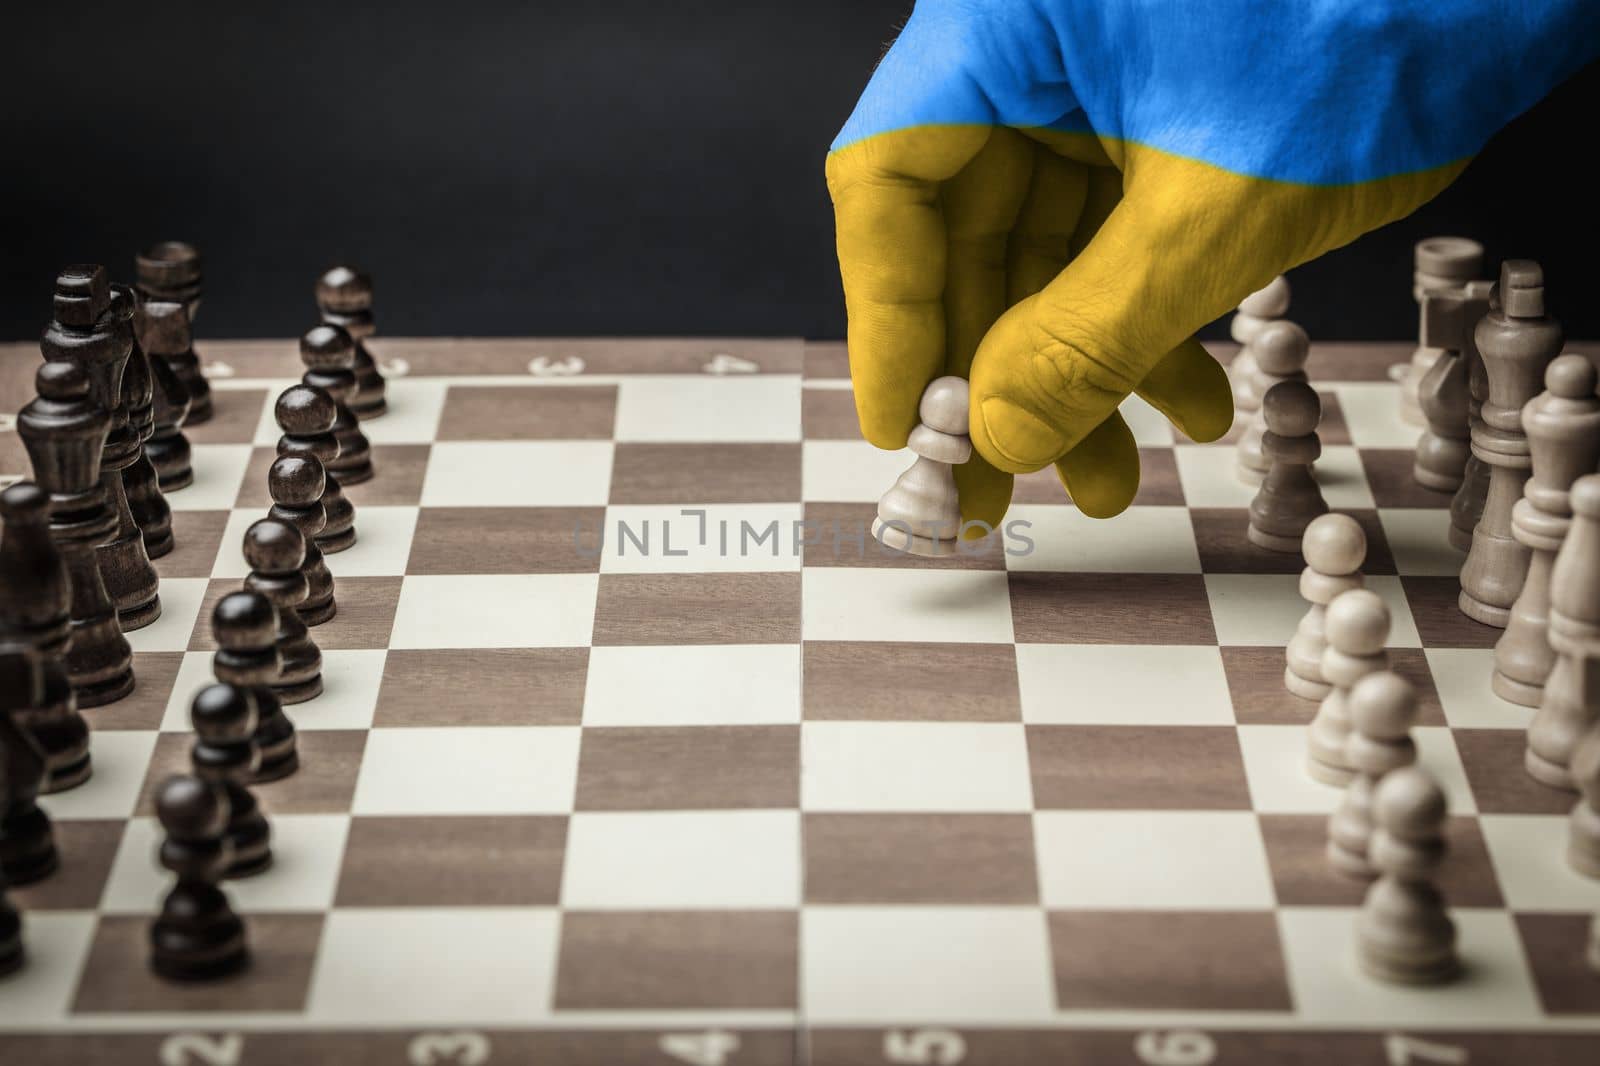 chess board as battlefield in ukraine, with yellow blue hand making decisive step. concept needs help and support, truth will win